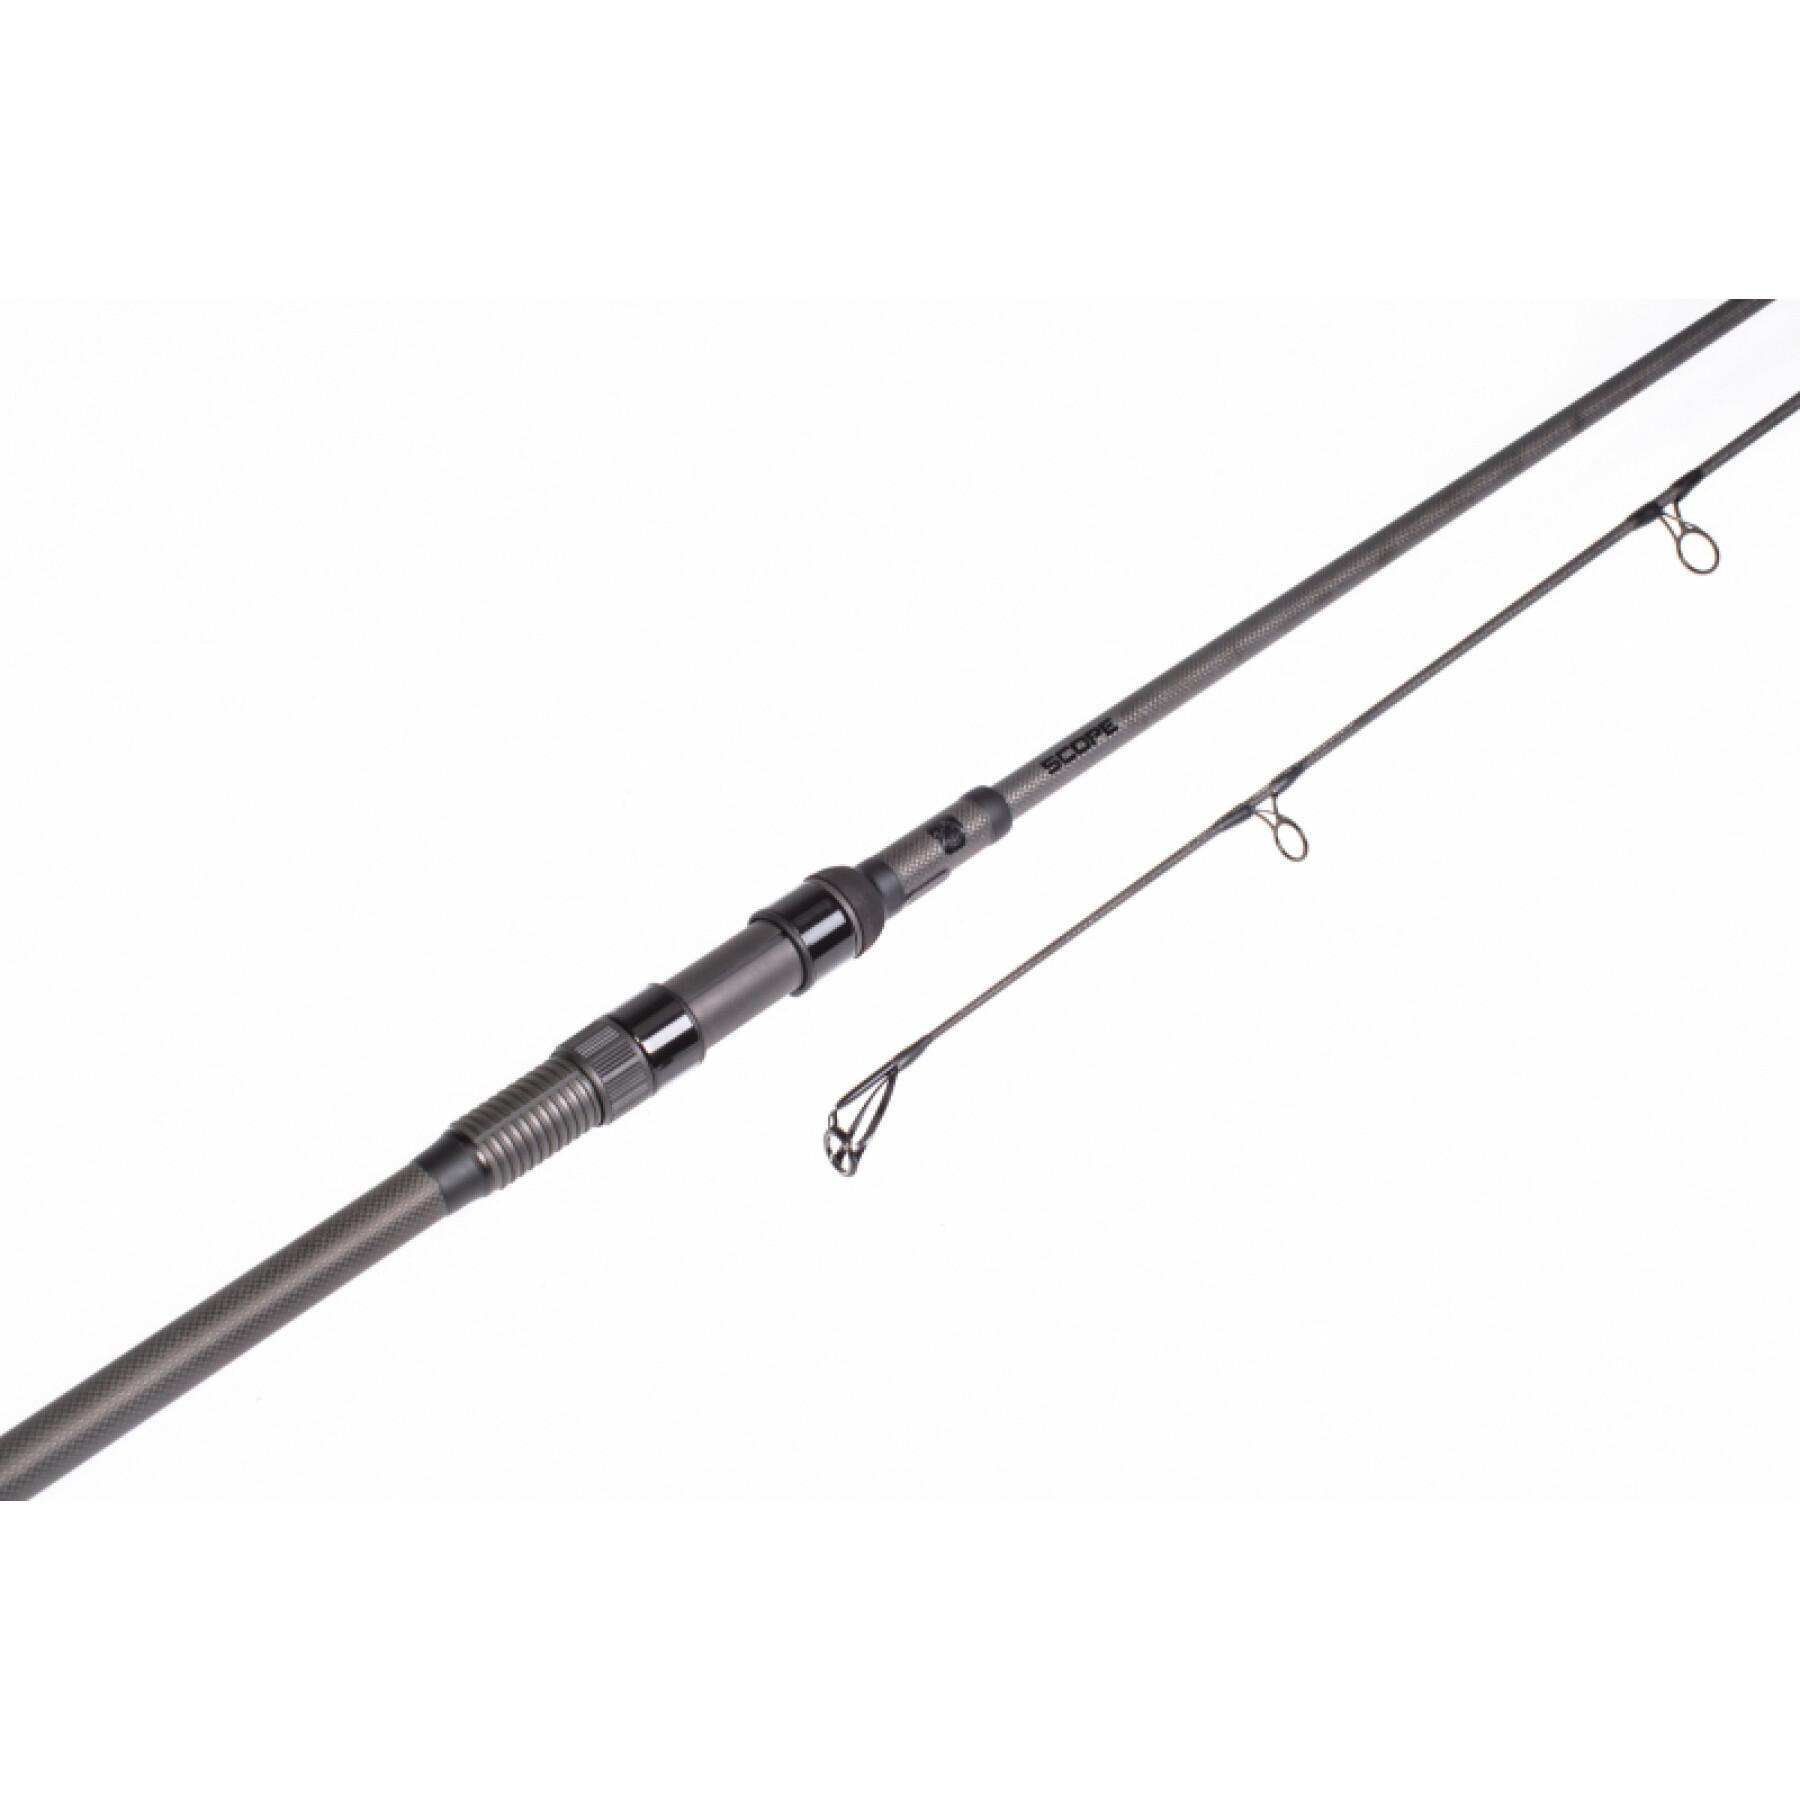 Fishing rod Scope Rods Abbreviated 9ft 4.5lb